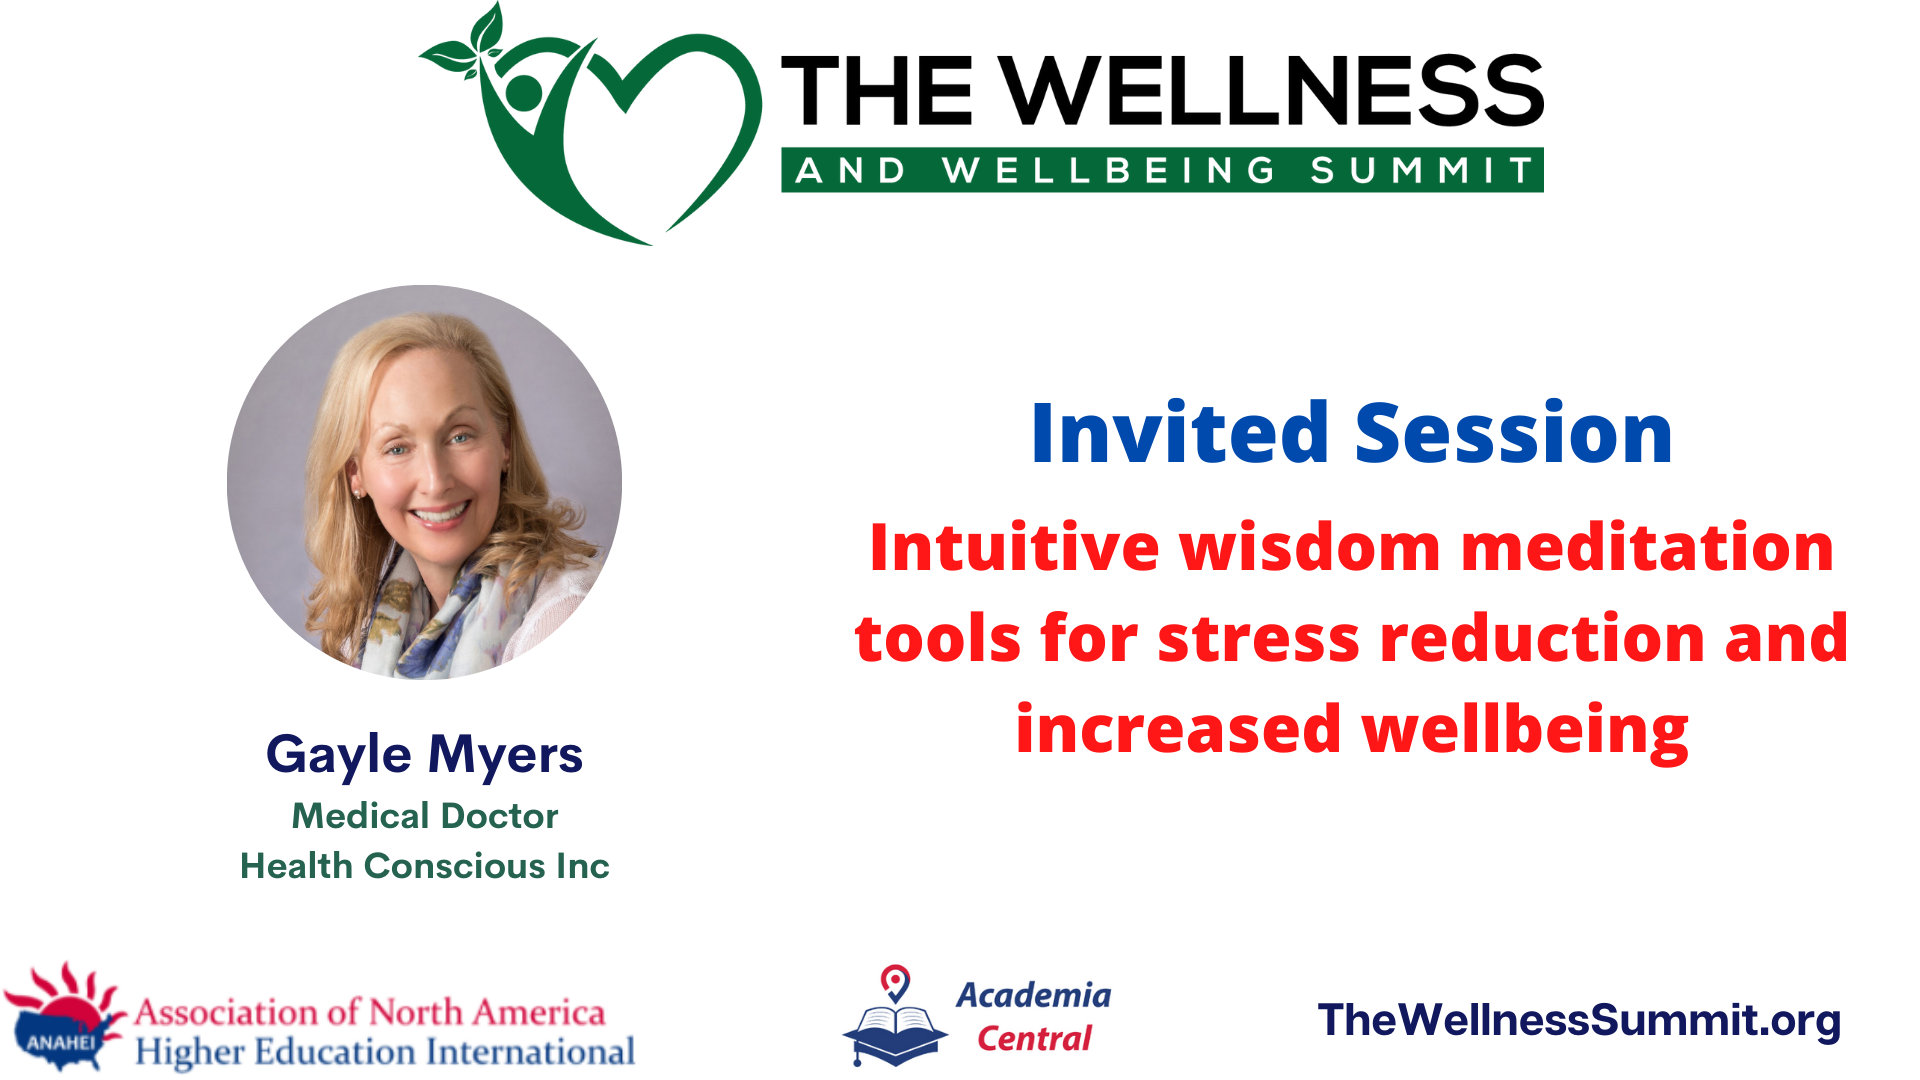 DR. GAYLE MYERS AT THE WELLNESS & WELLBEING SUMMIT SPRING 2022